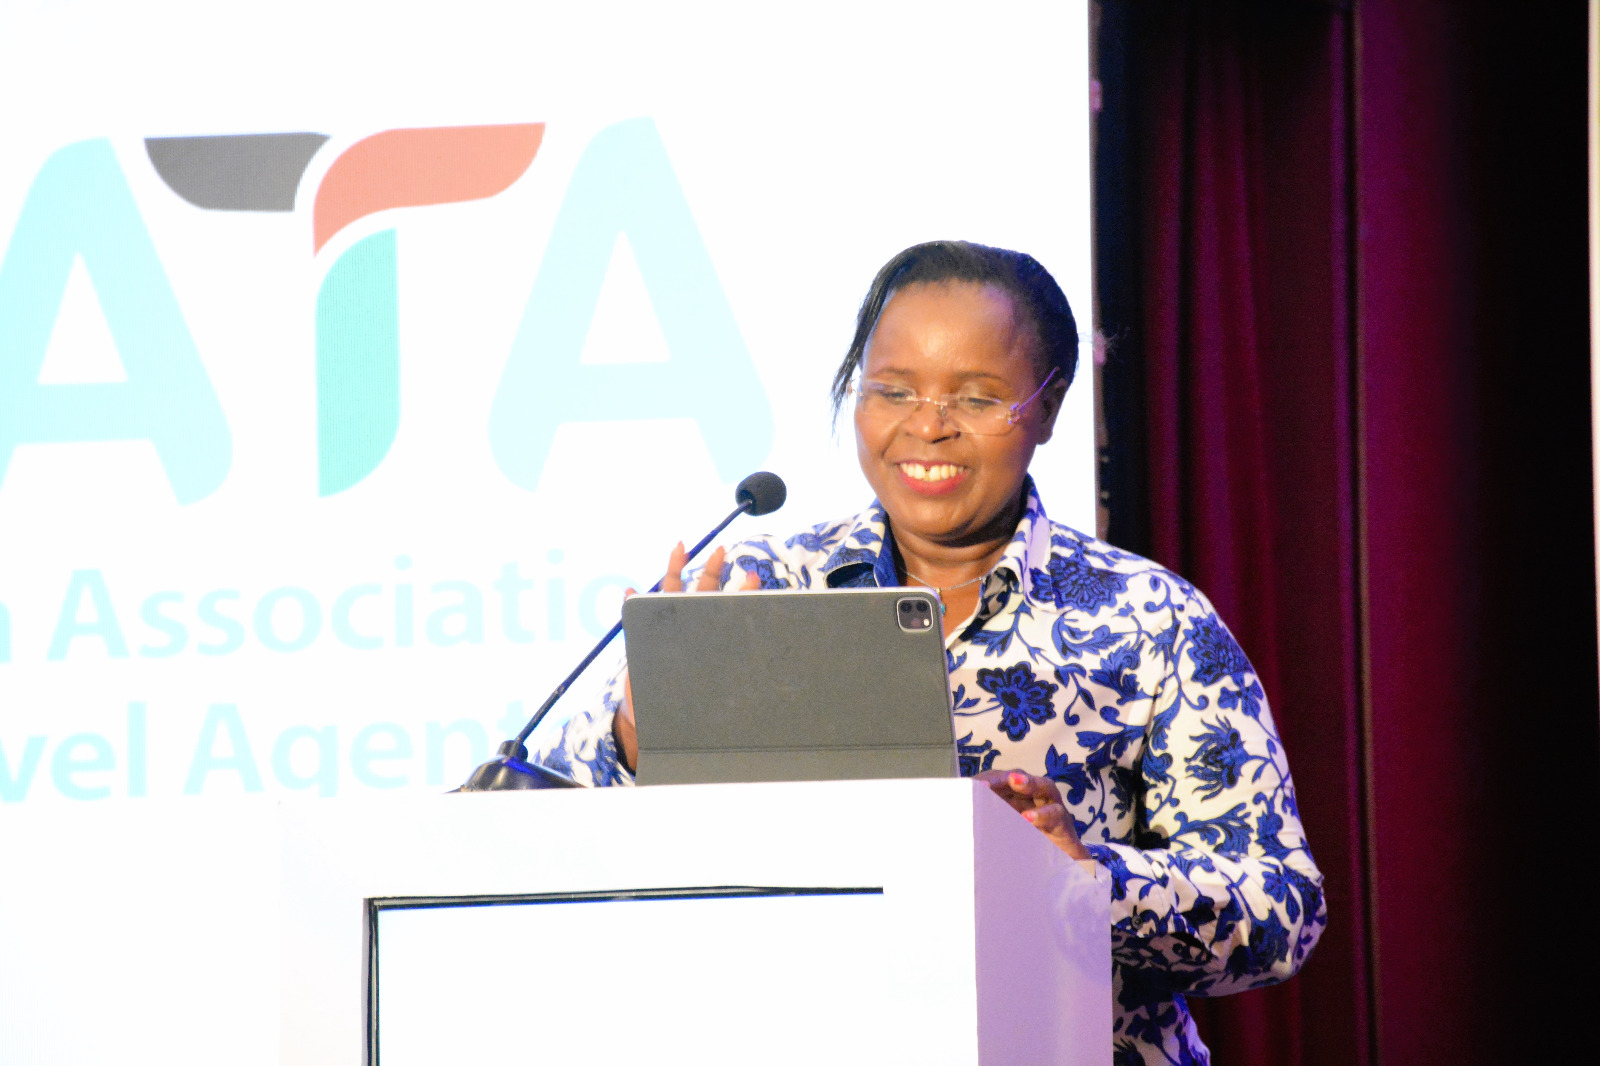 The Cabinet Secretary, Hon. Peninah Malonza, delivering her keynote address at the Kenya Association of Travel Agents annual convention and Annual General Meeting, in Naivasha.